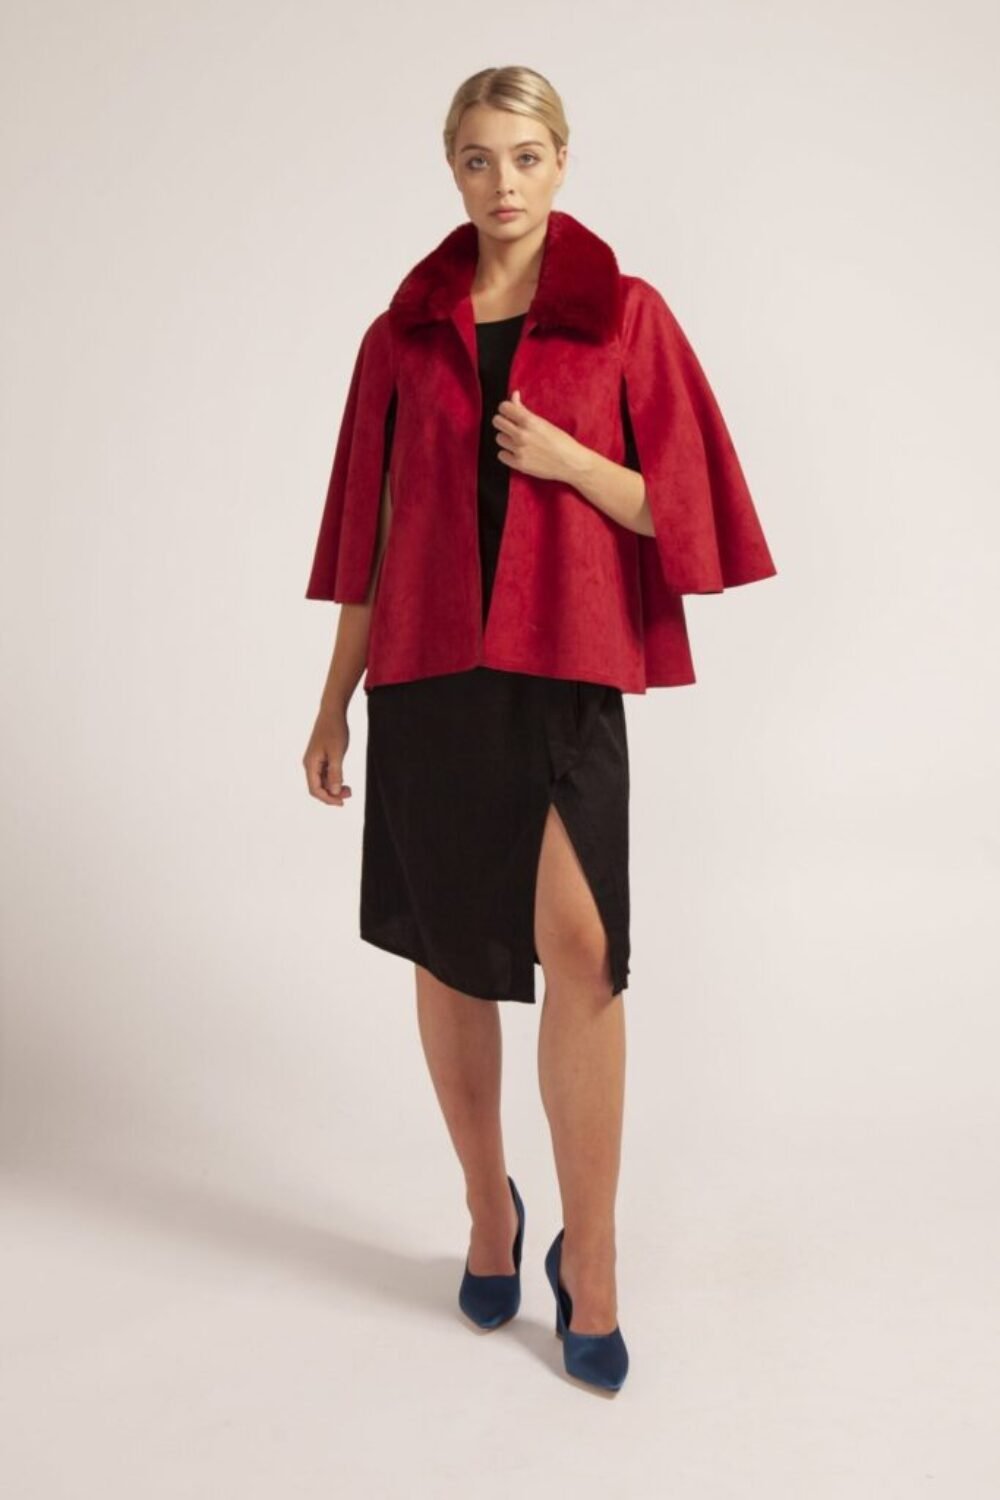 Shop Lux Red Faux Fur and Faux Suede Cape Jacket and women's luxury and designer clothes at www.lux-apparel.co.uk